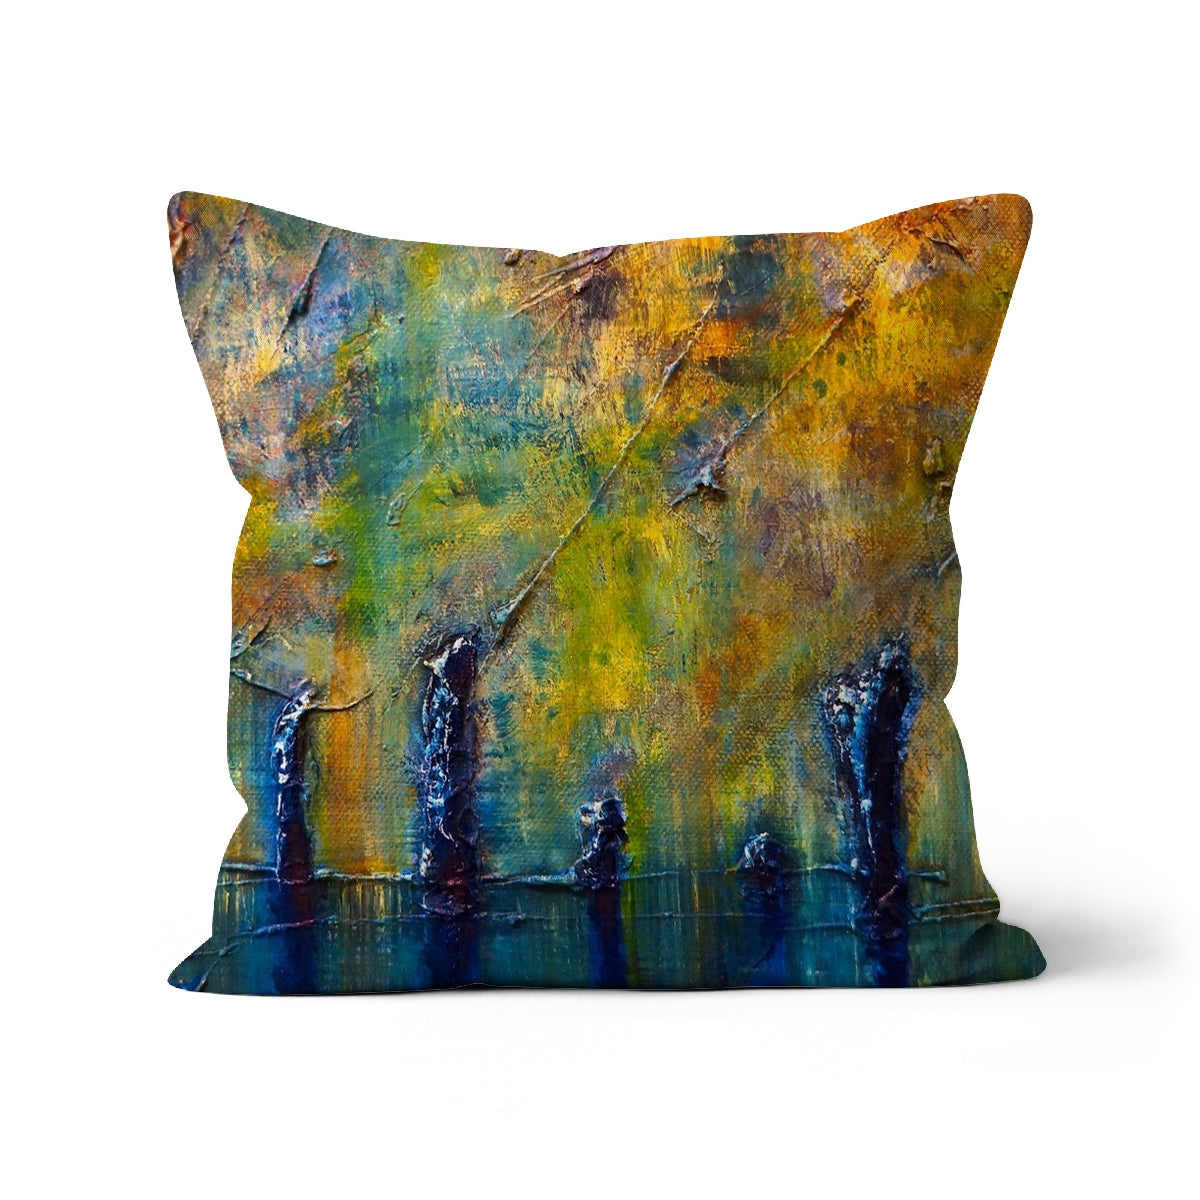 Stenness Moonlight Orkney Art Gifts Cushion-Cushions-Orkney Art Gallery-Canvas-16"x16"-Paintings, Prints, Homeware, Art Gifts From Scotland By Scottish Artist Kevin Hunter